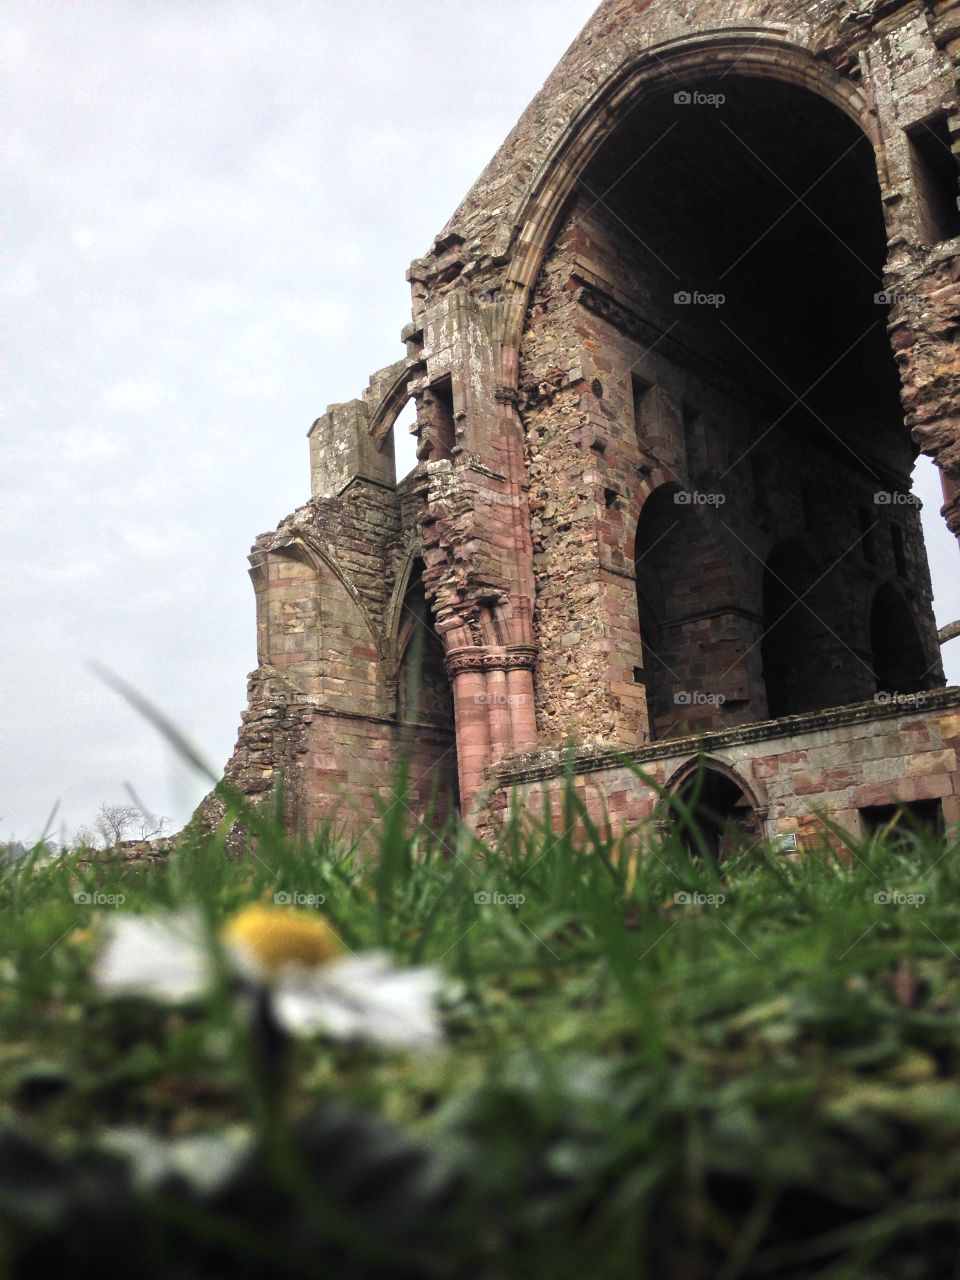 A single flower in front of the Melrose Abbey cannot draw the eye from the historic stone structure